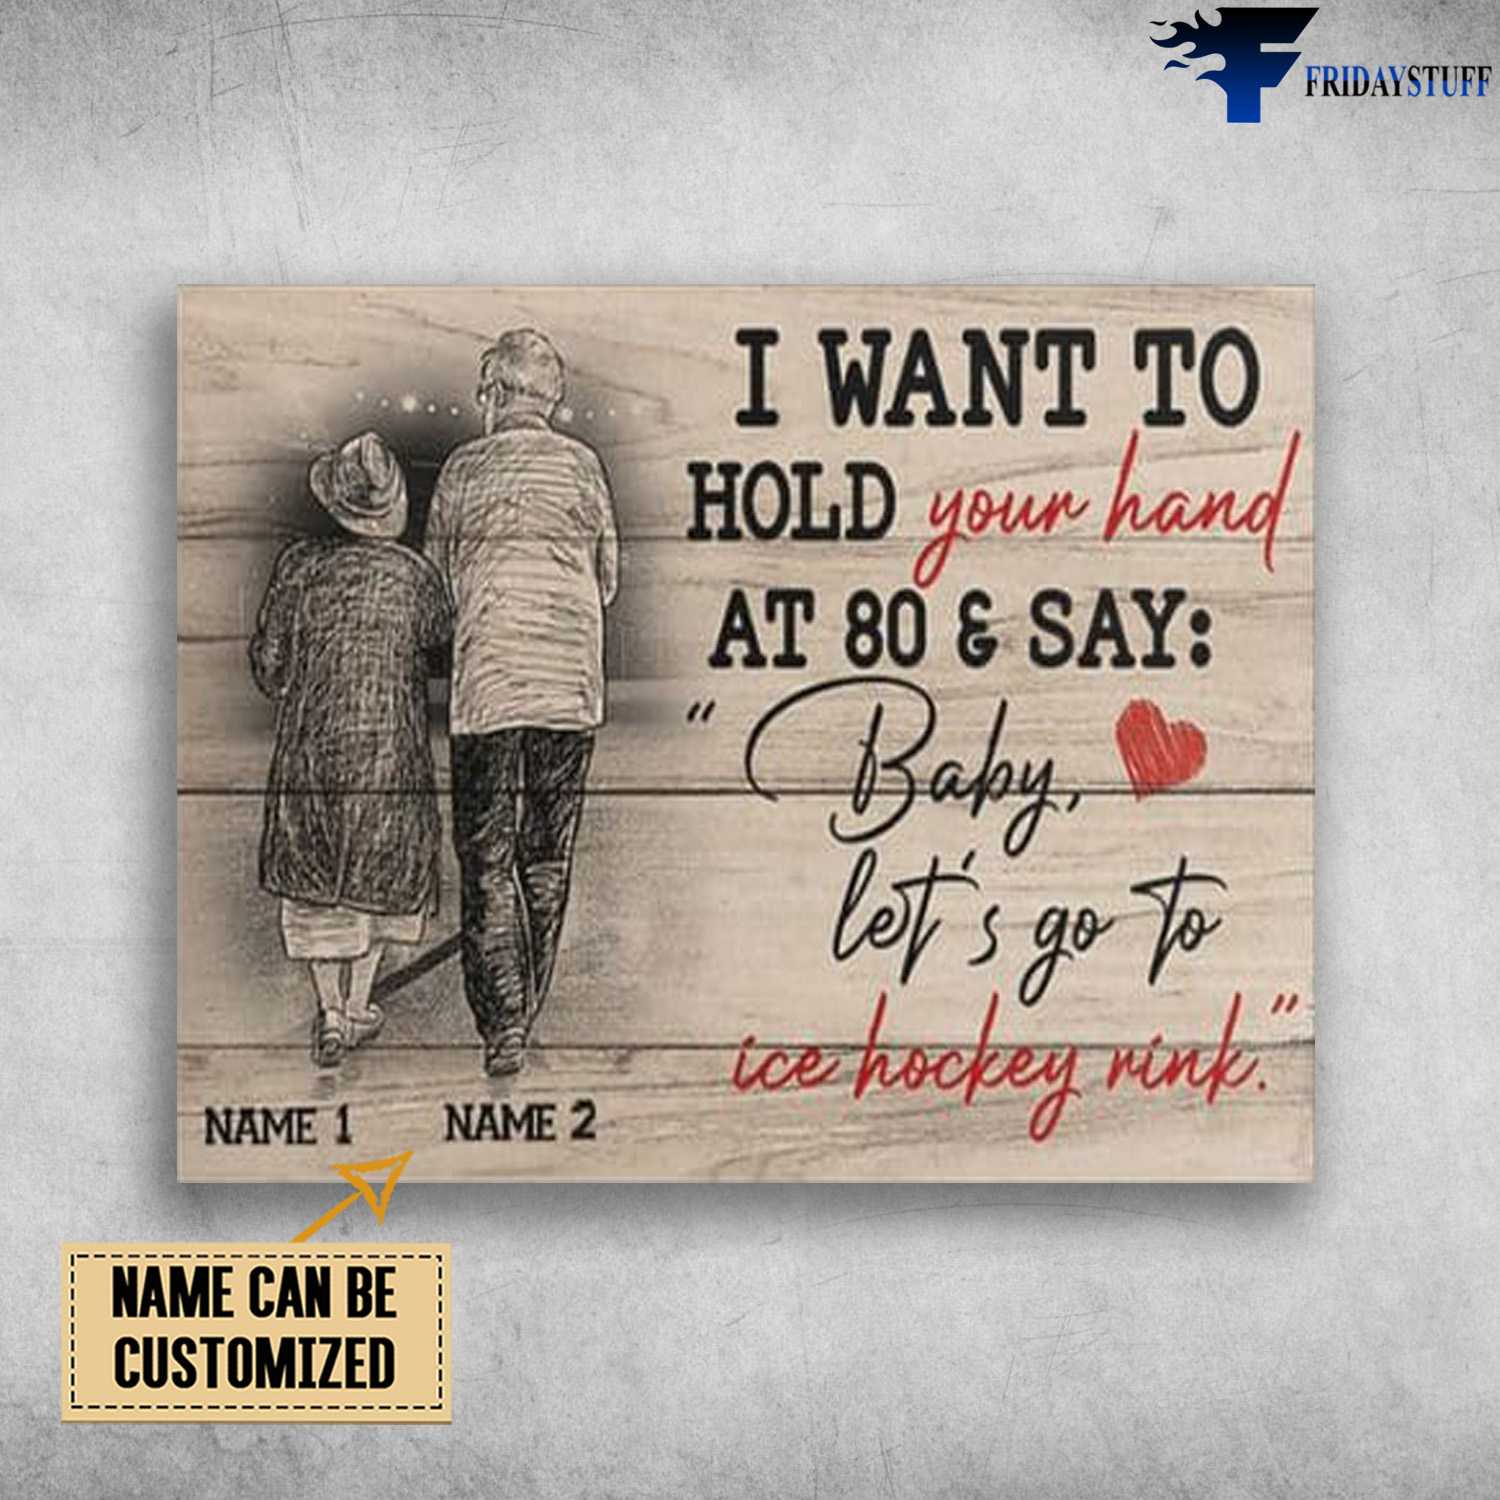 Old Couple, Love Poster, I Want To Hold Your Hand, At 80 And Says, Baby Let's Go To Ice Hockey Rink